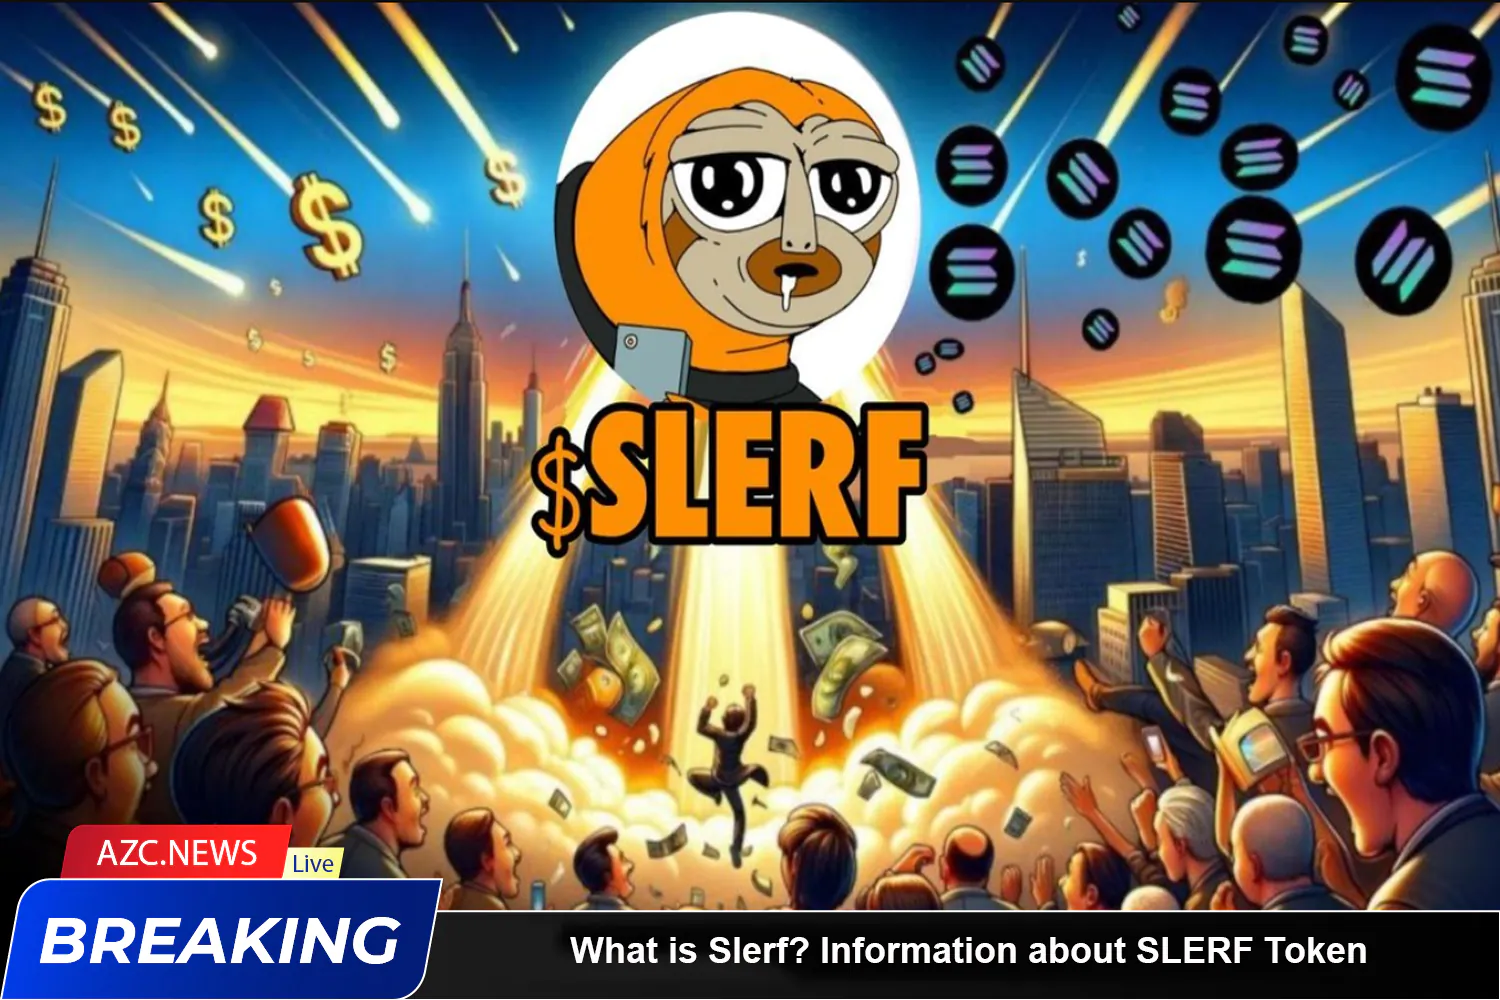 What Is Slerf Information About Slerf Token